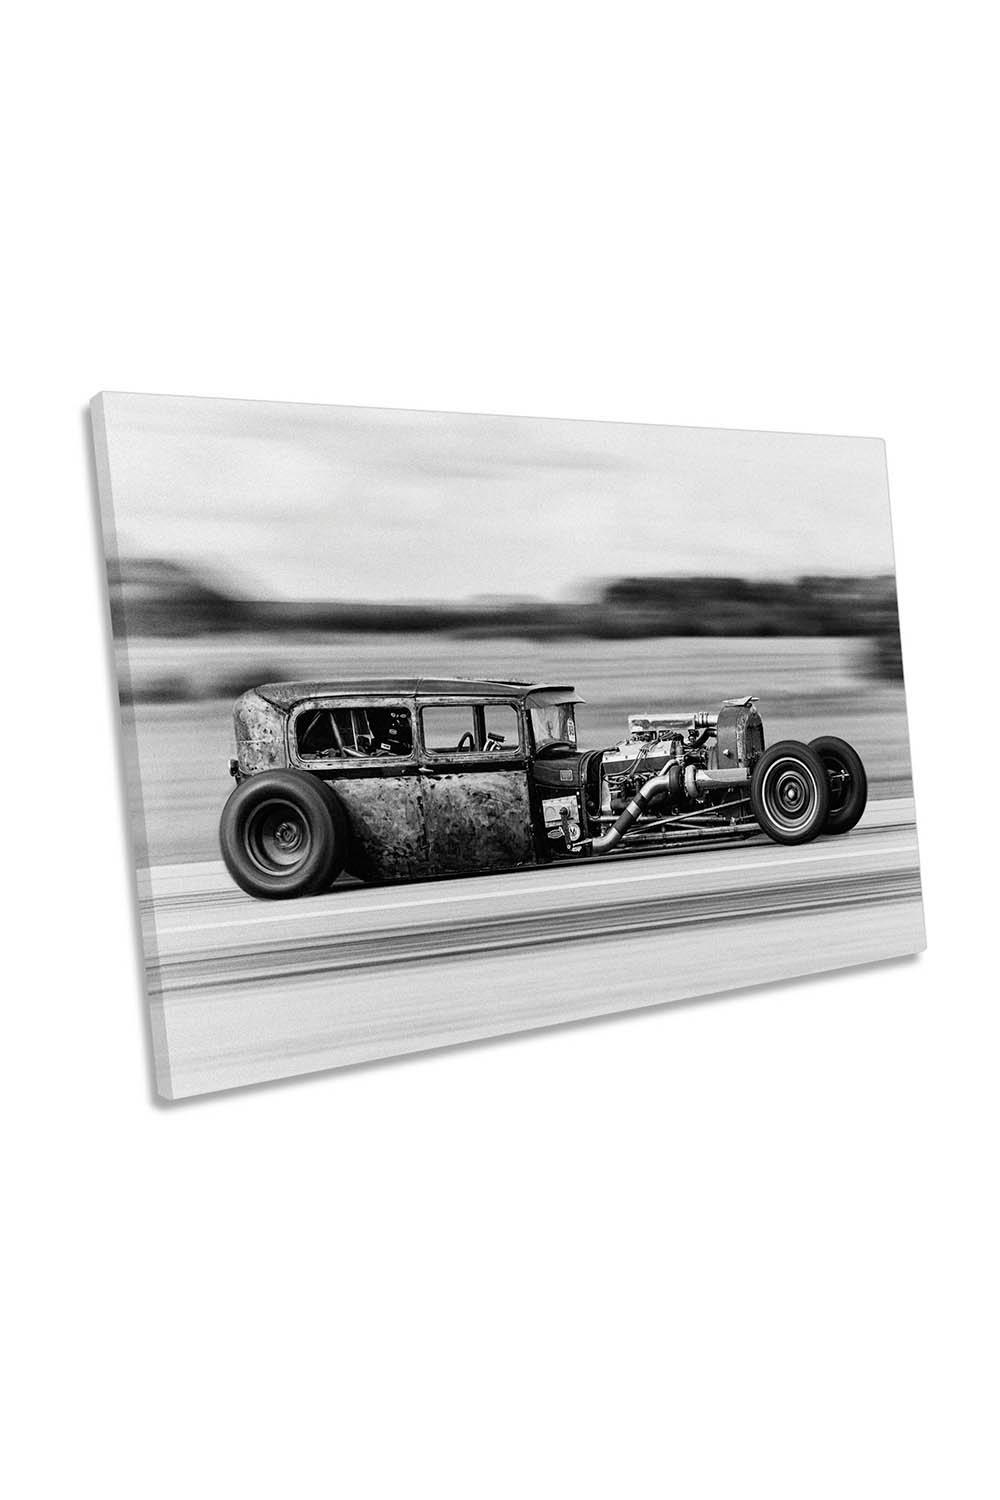 Lowrider Hot Rod Car Canvas Wall Art Picture Print